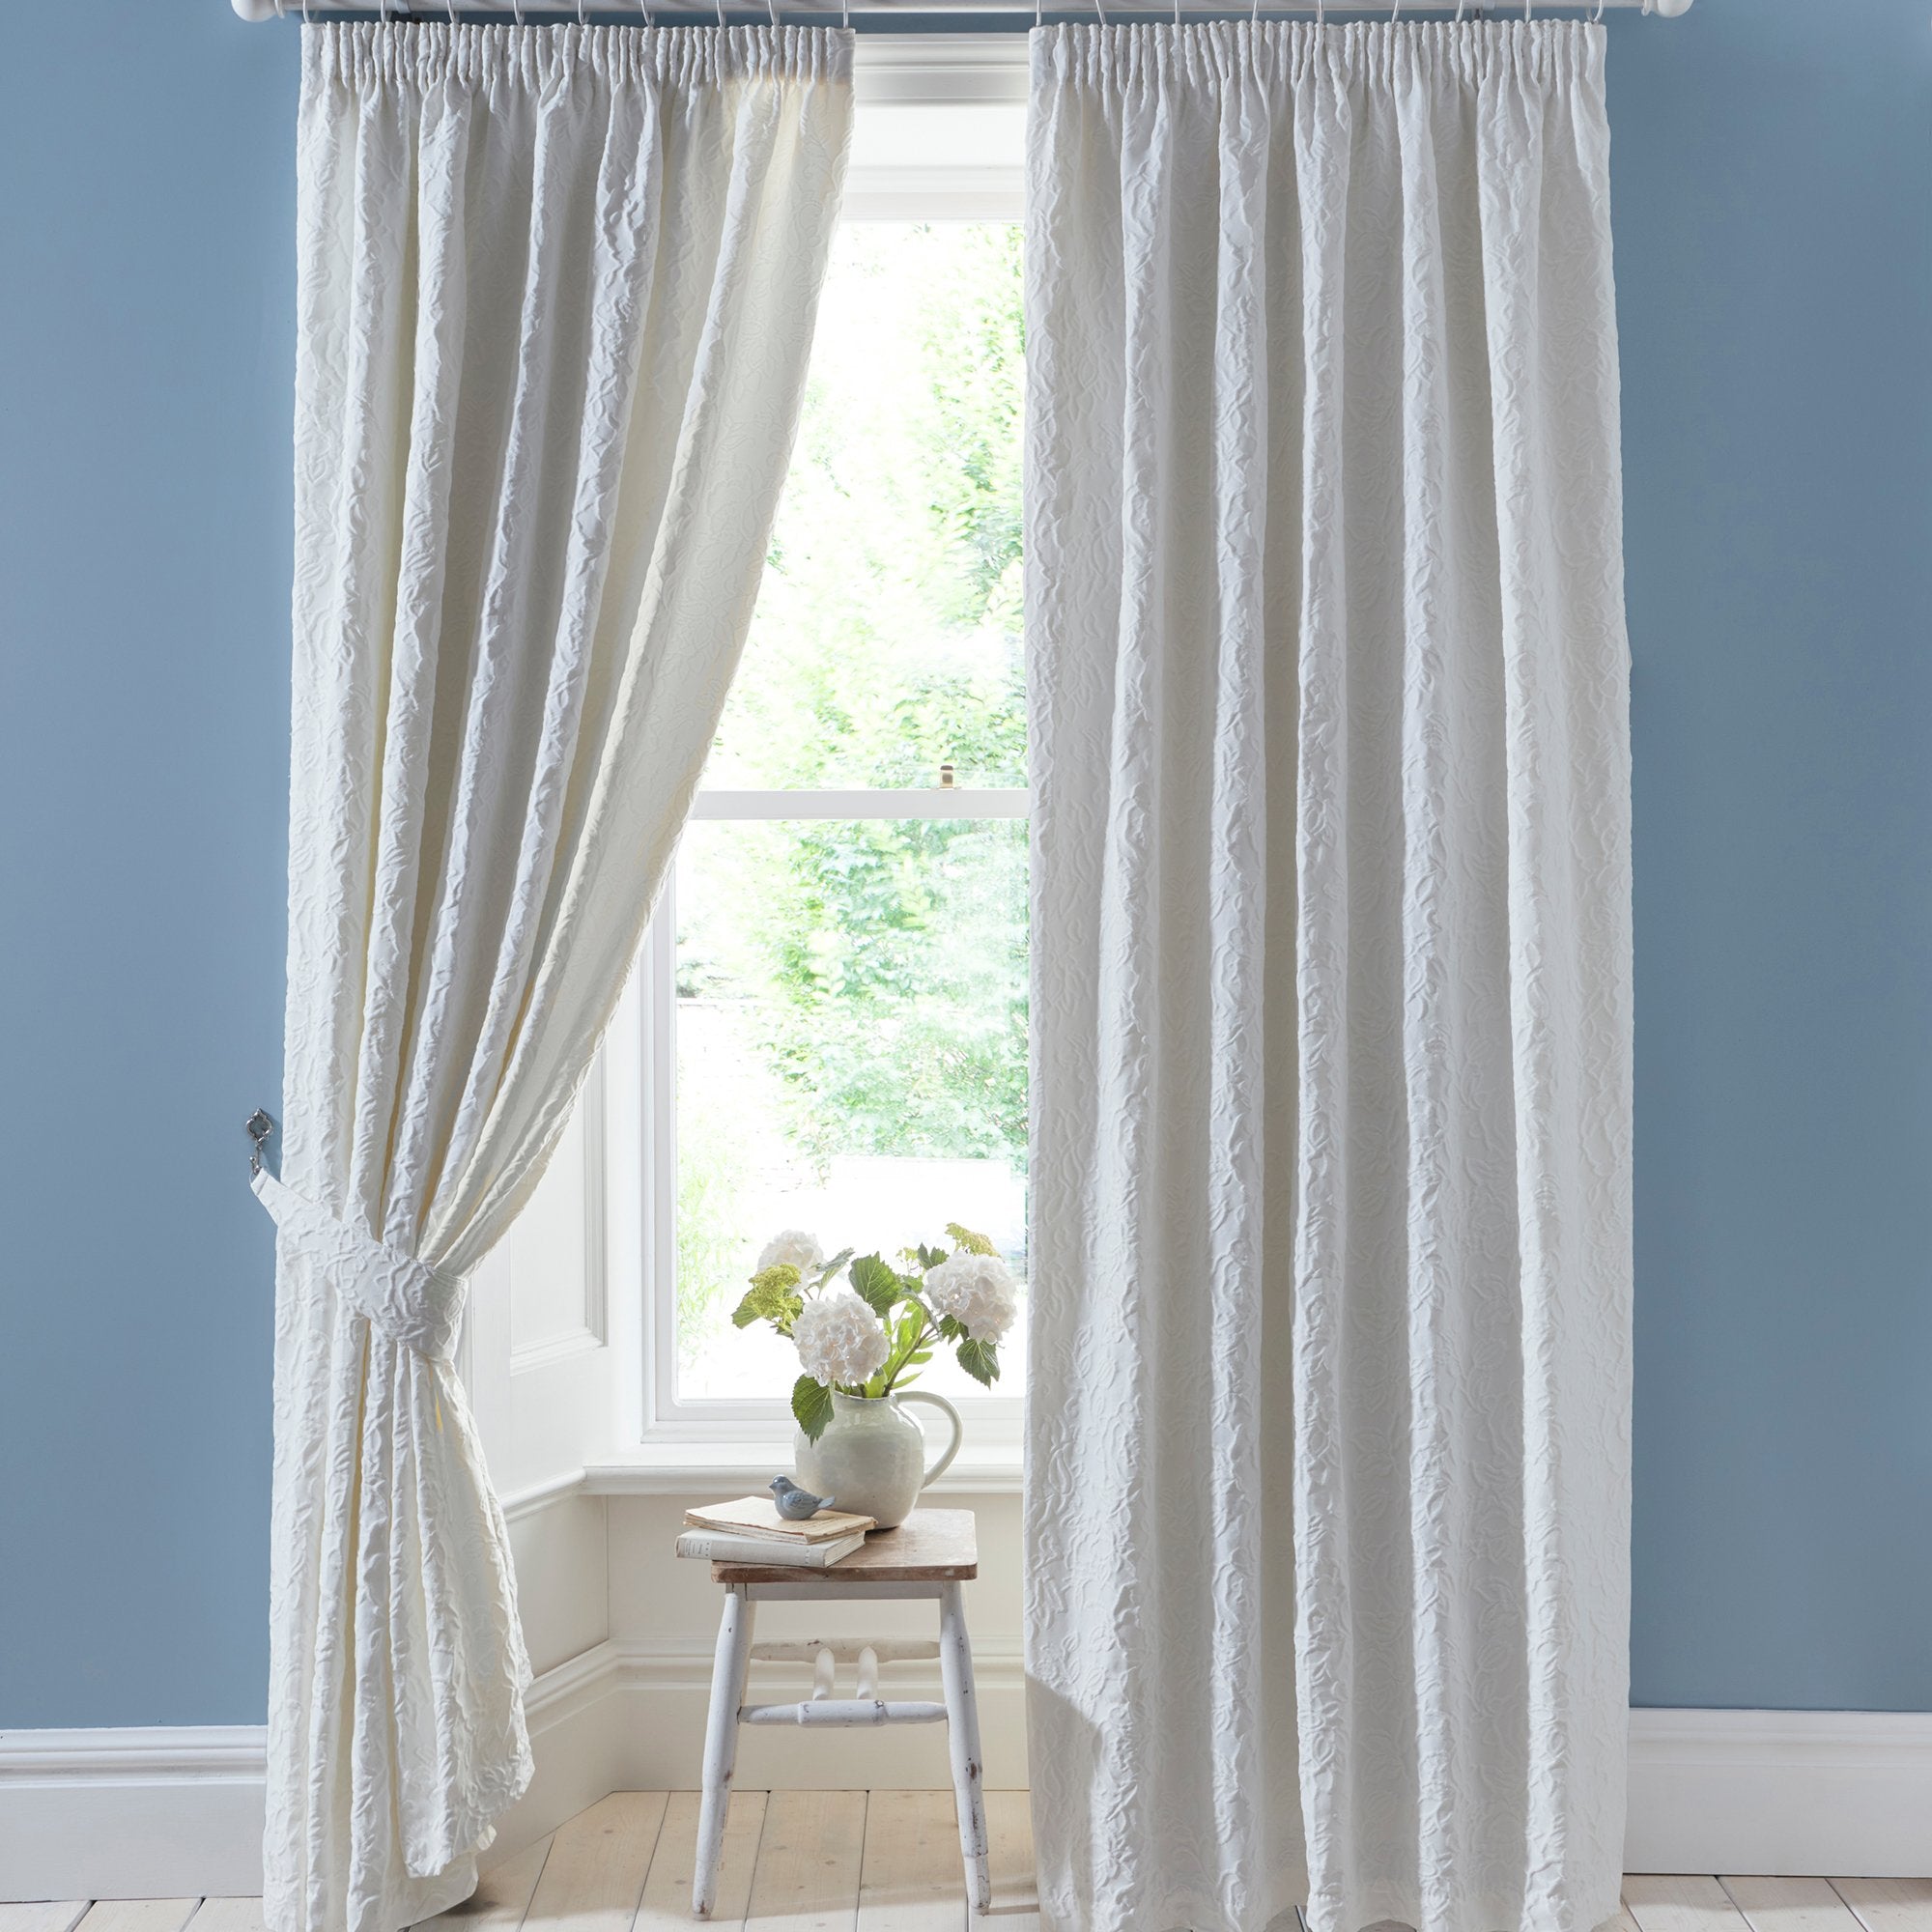 Pair of Pencil Pleat Curtains With Tie-Backs Collier by Appletree Heritage in White